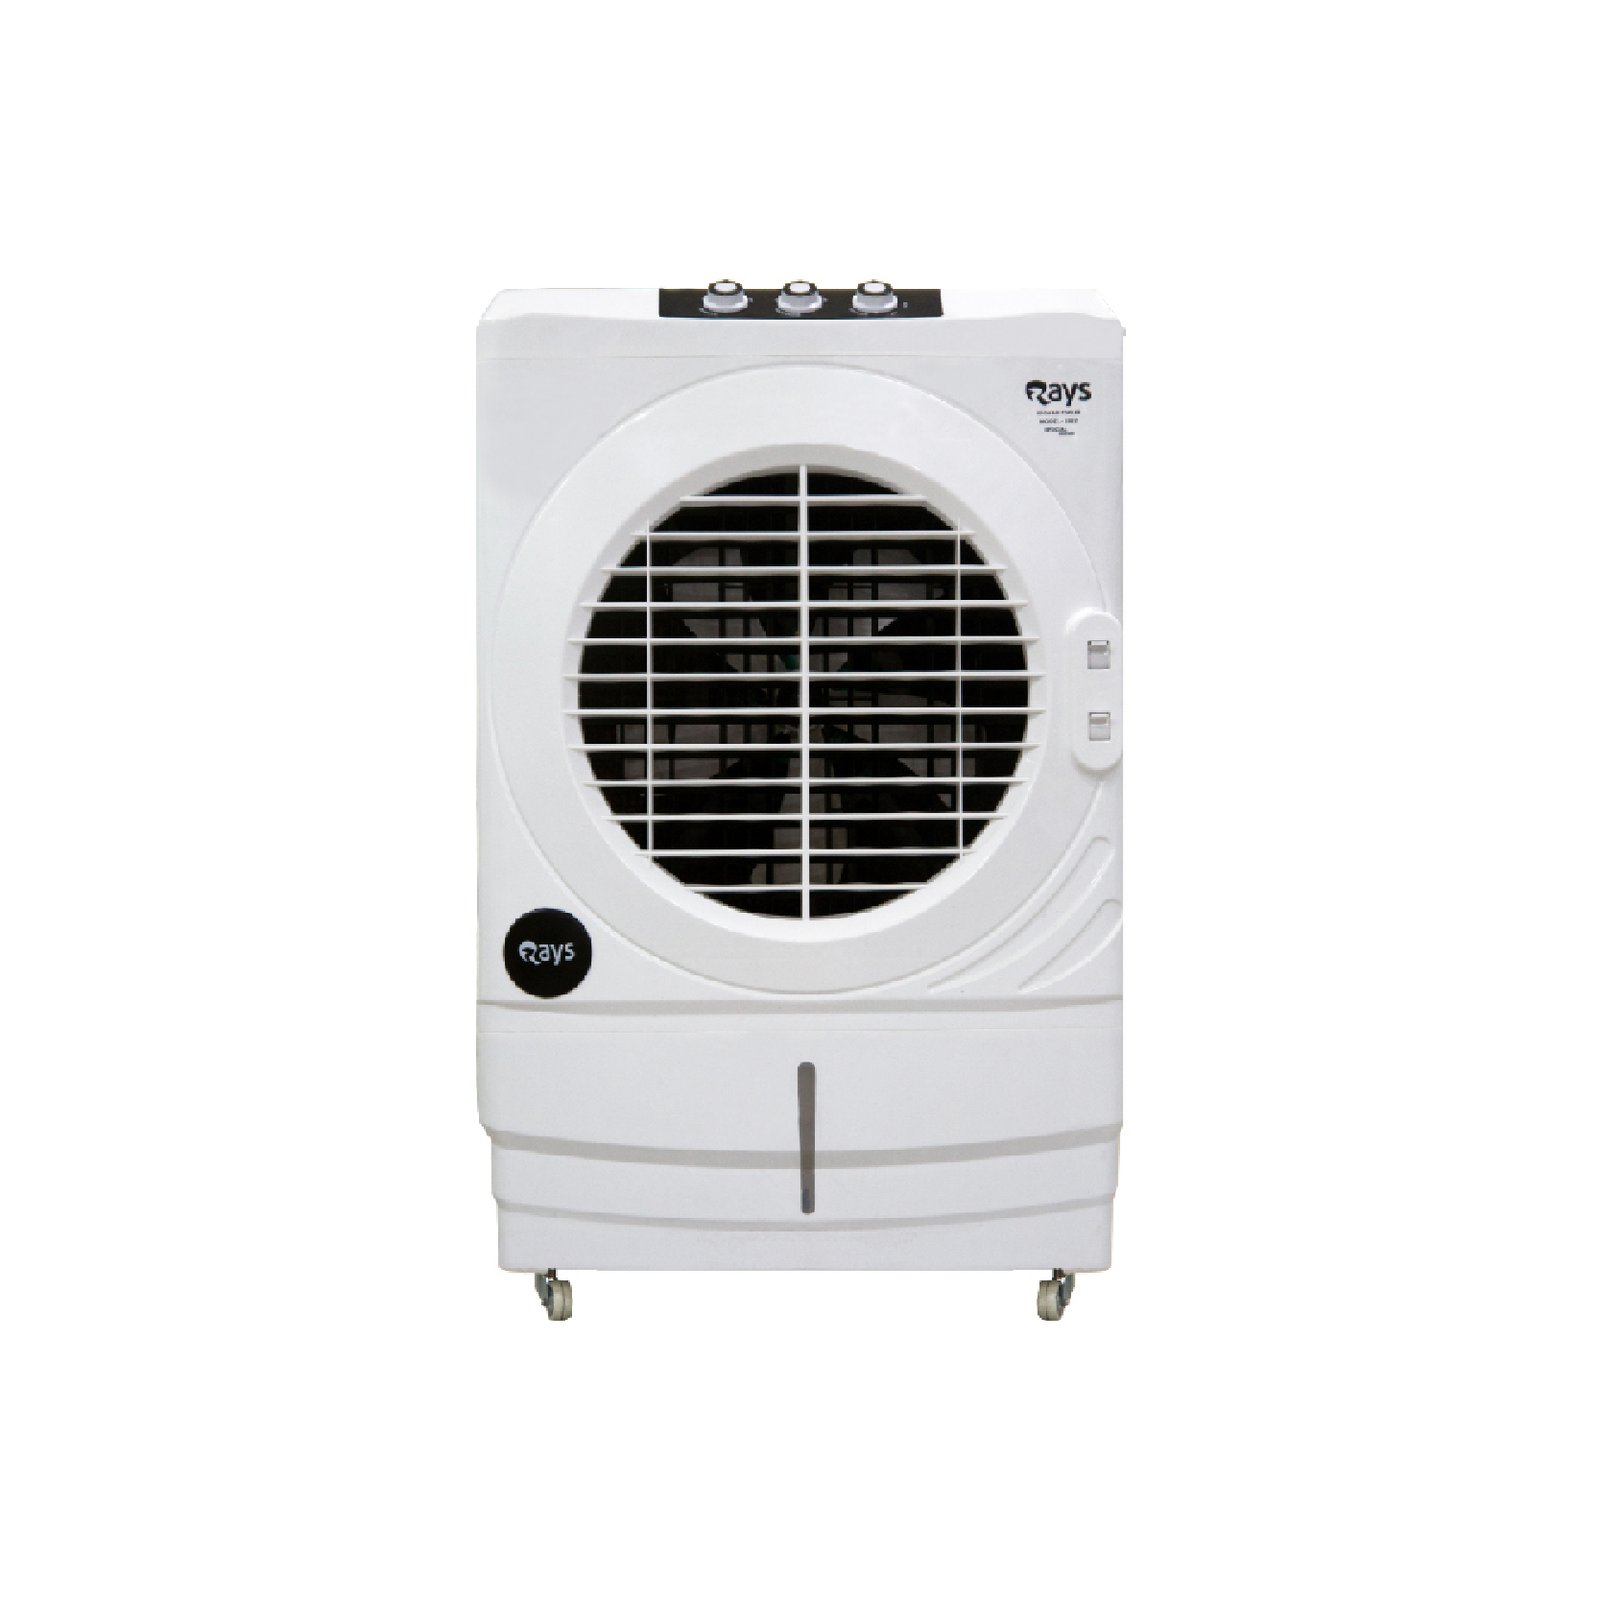 Rays Room Air Cooler RC-2022